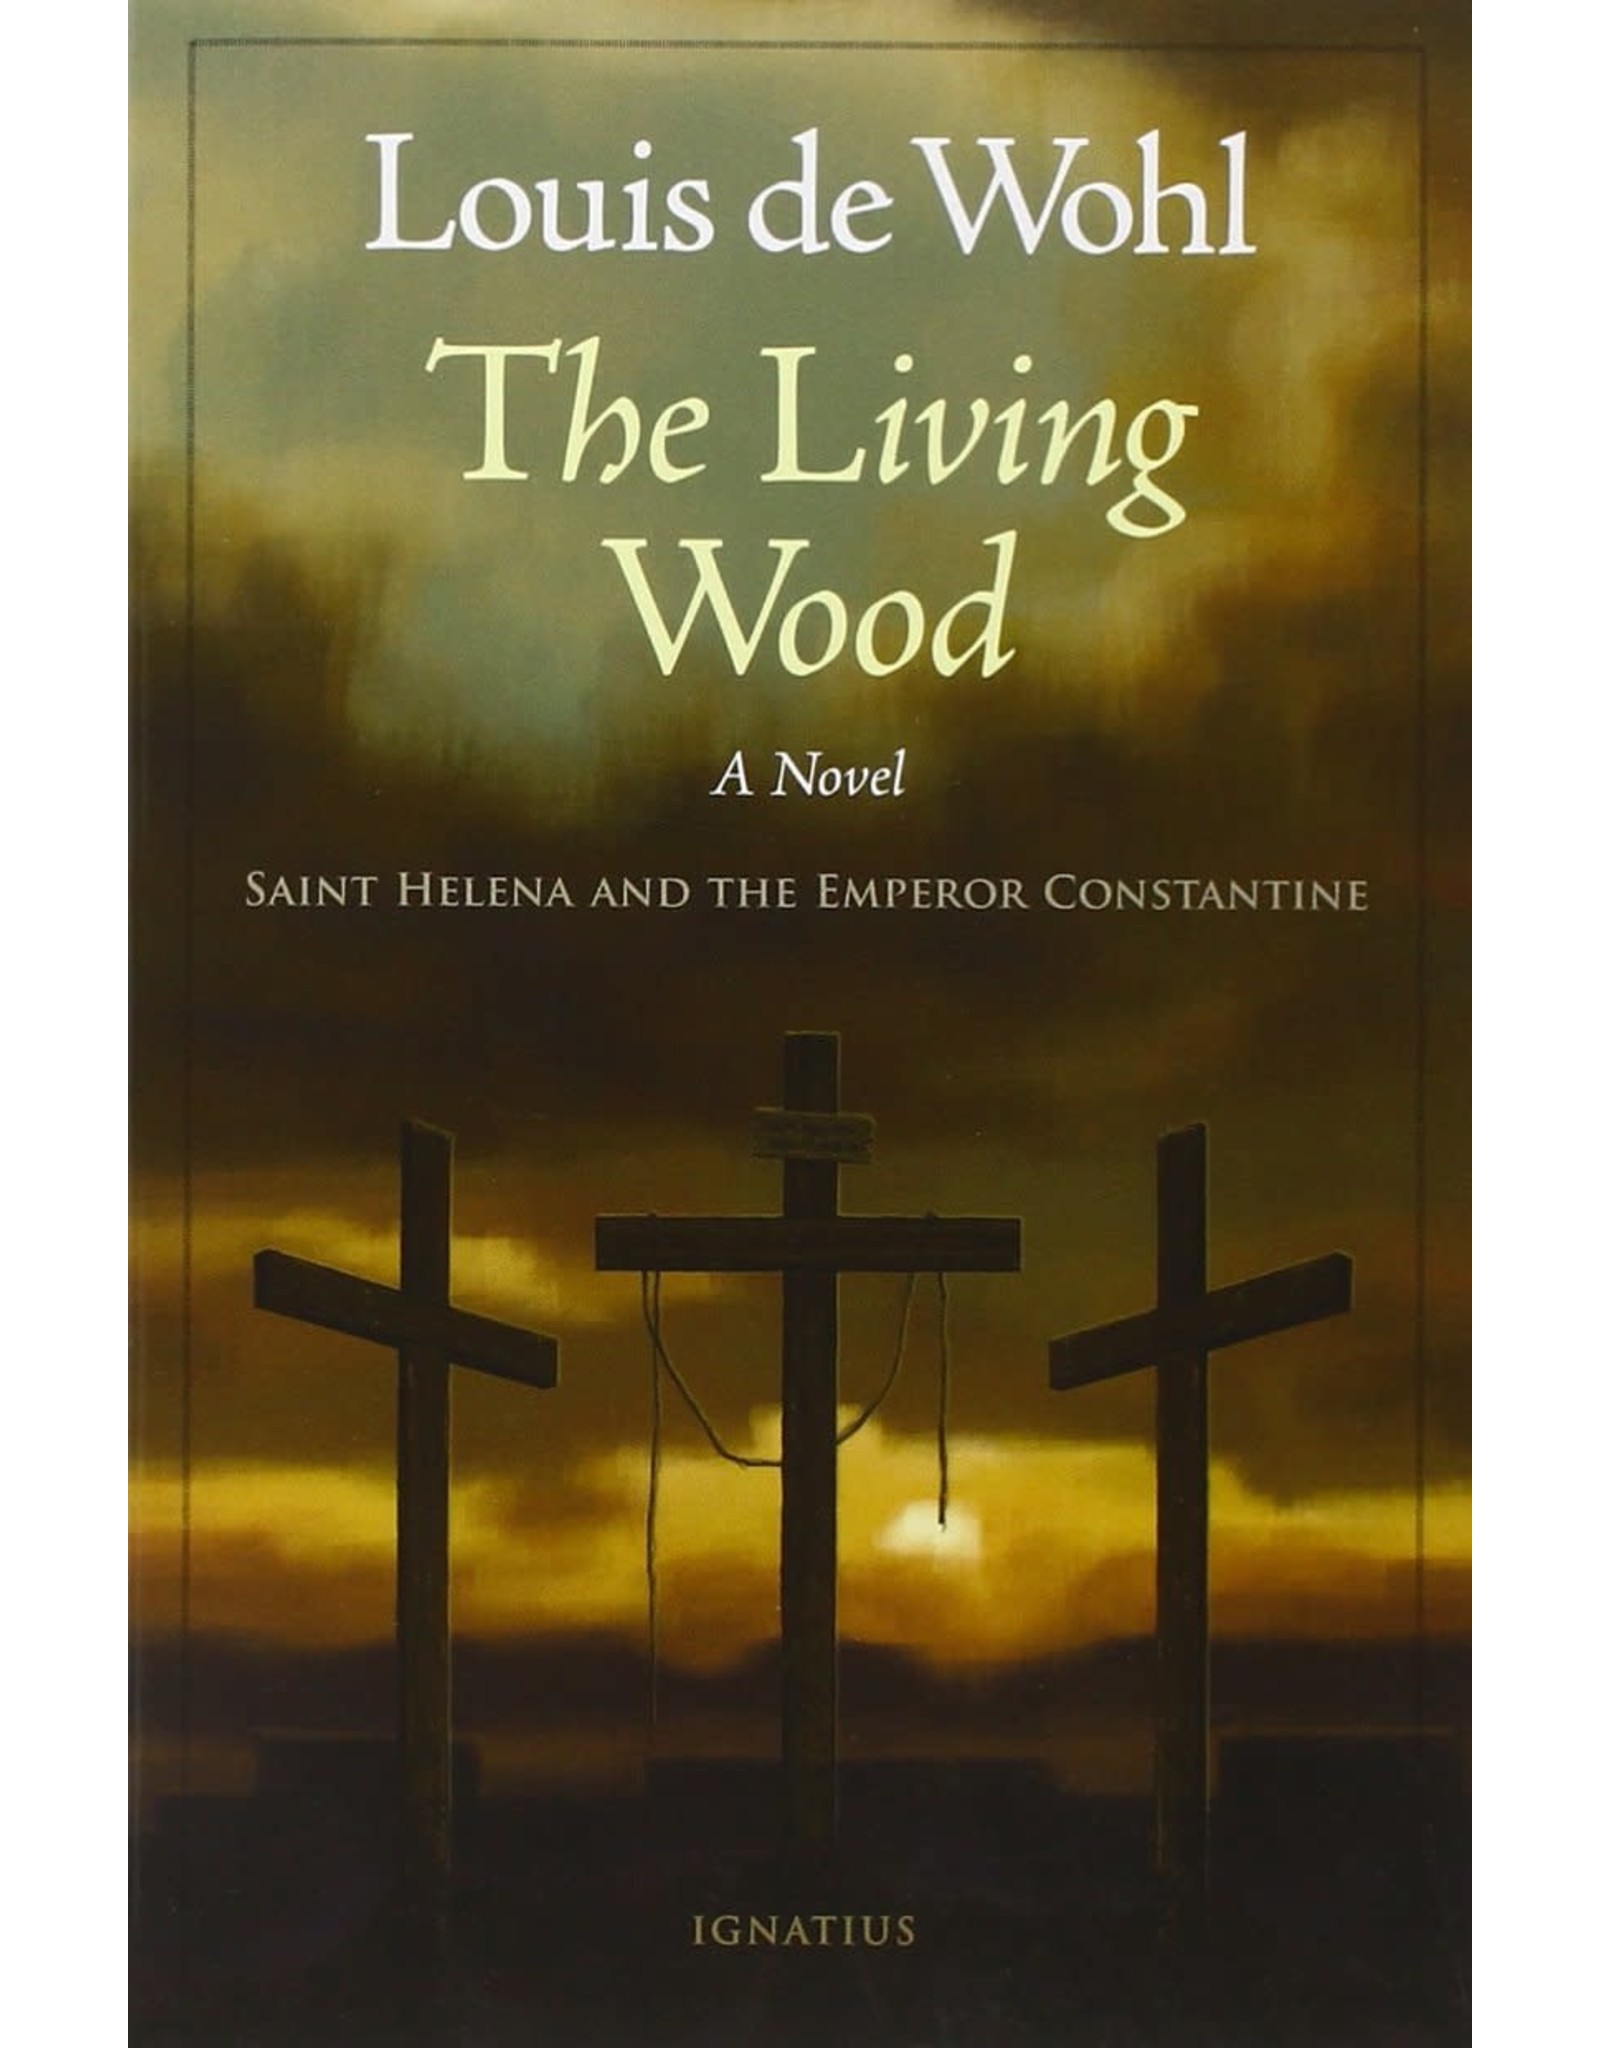 The Living Wood: A Novel about Saint Helena & the Emperor Constantine